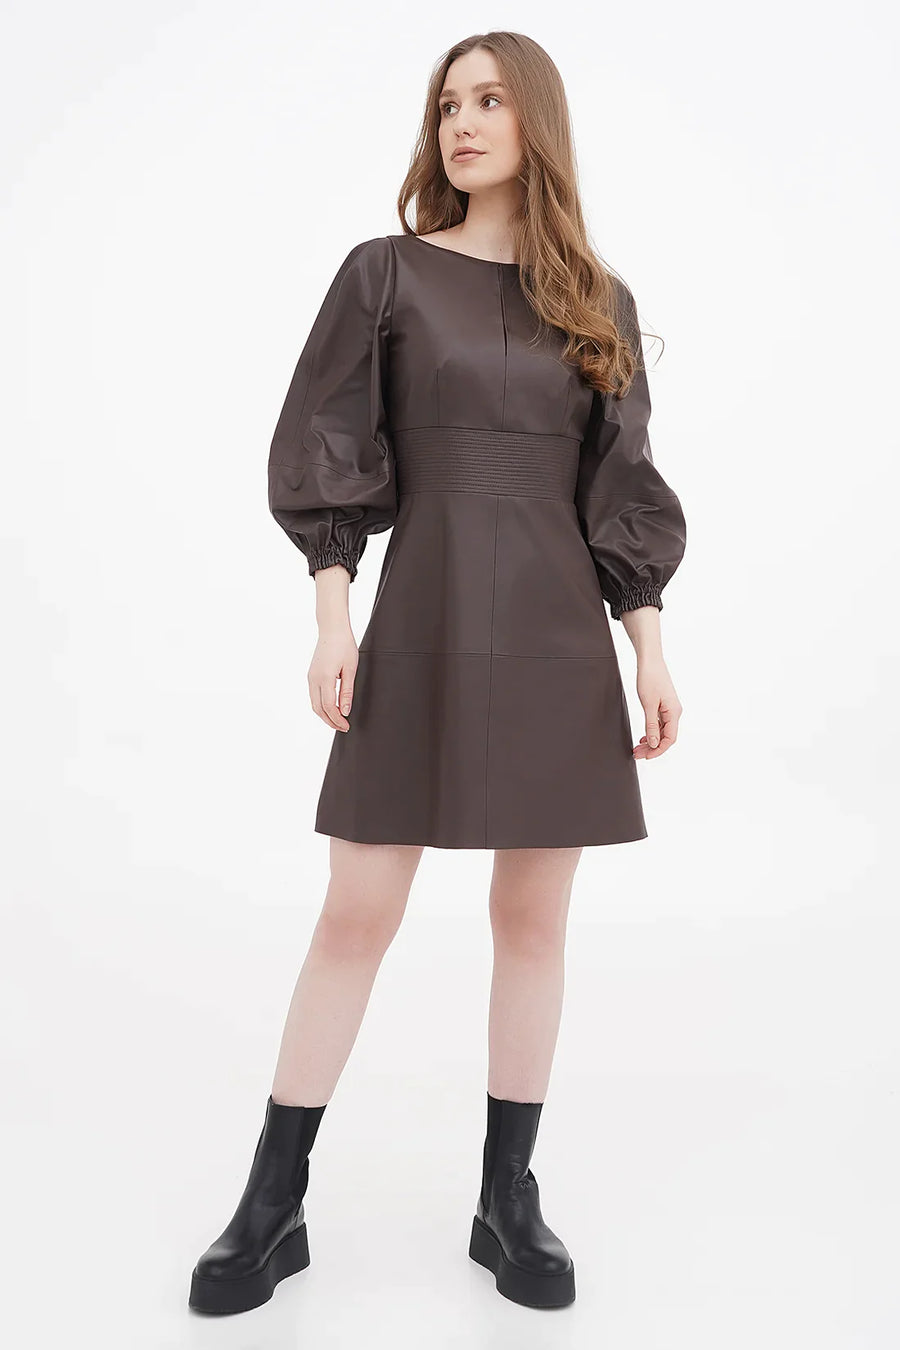 A Model Wearing Brown Organic Cotton Long sleeve organic vegan leather dress, curated by Only Ethikal